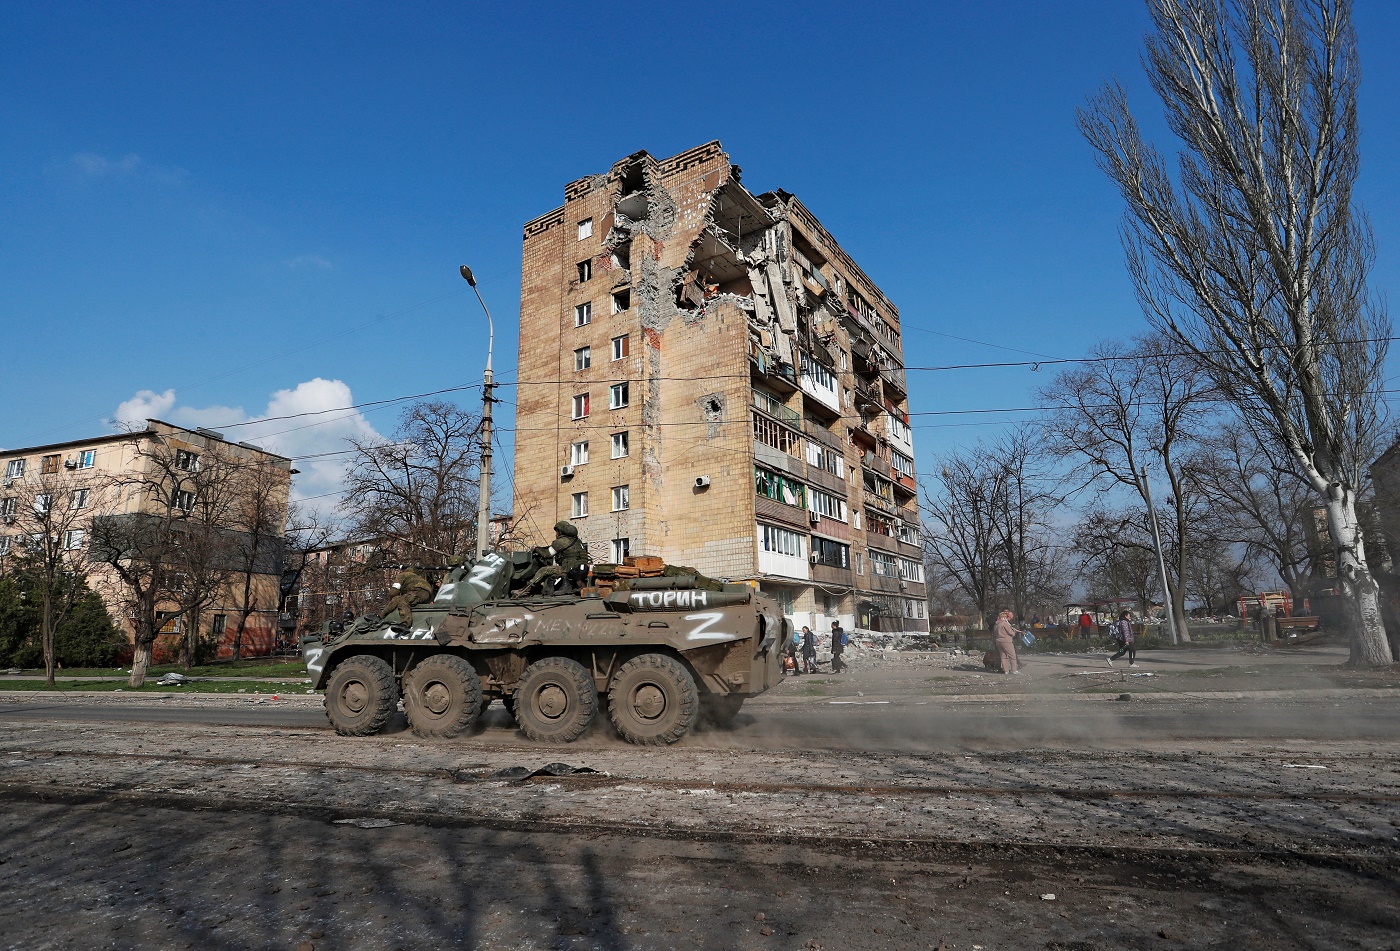 russia-ukraine war: no word from mariupol as surrender window offered by russia opens